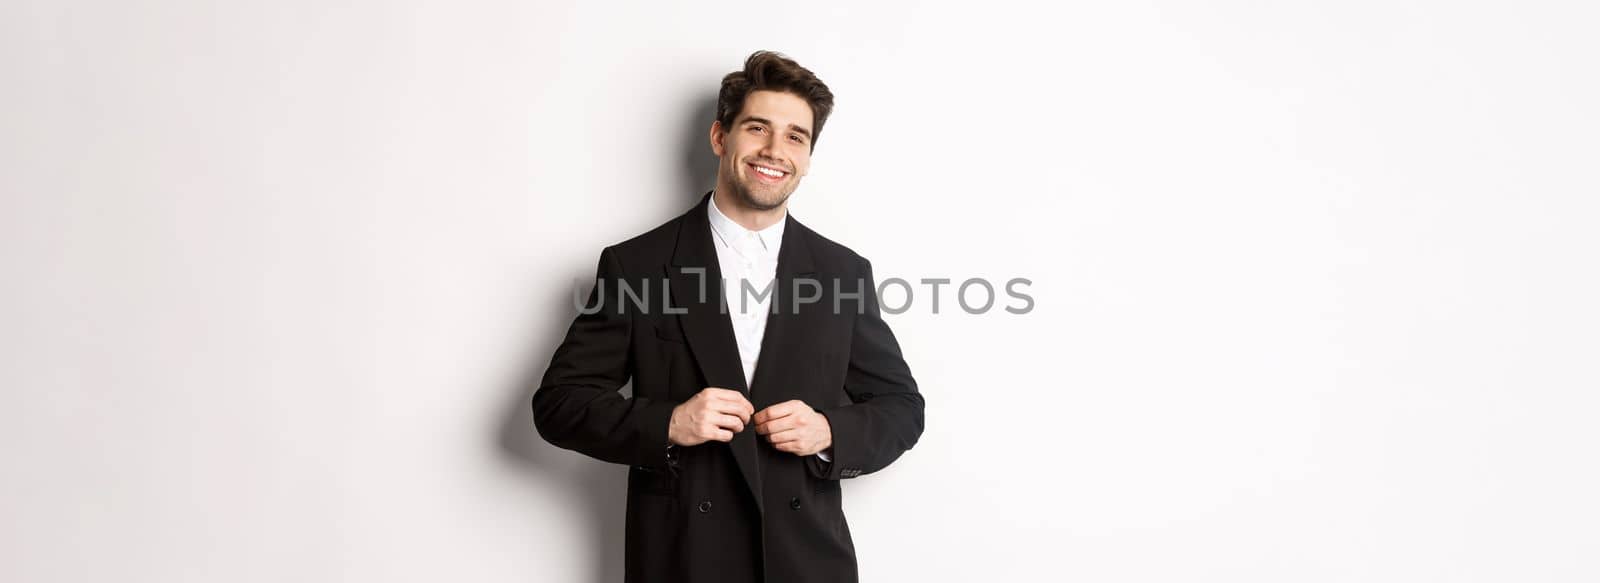 Image of handsome and confident businessman with beard, button down jacket and smiling, standing against white background.